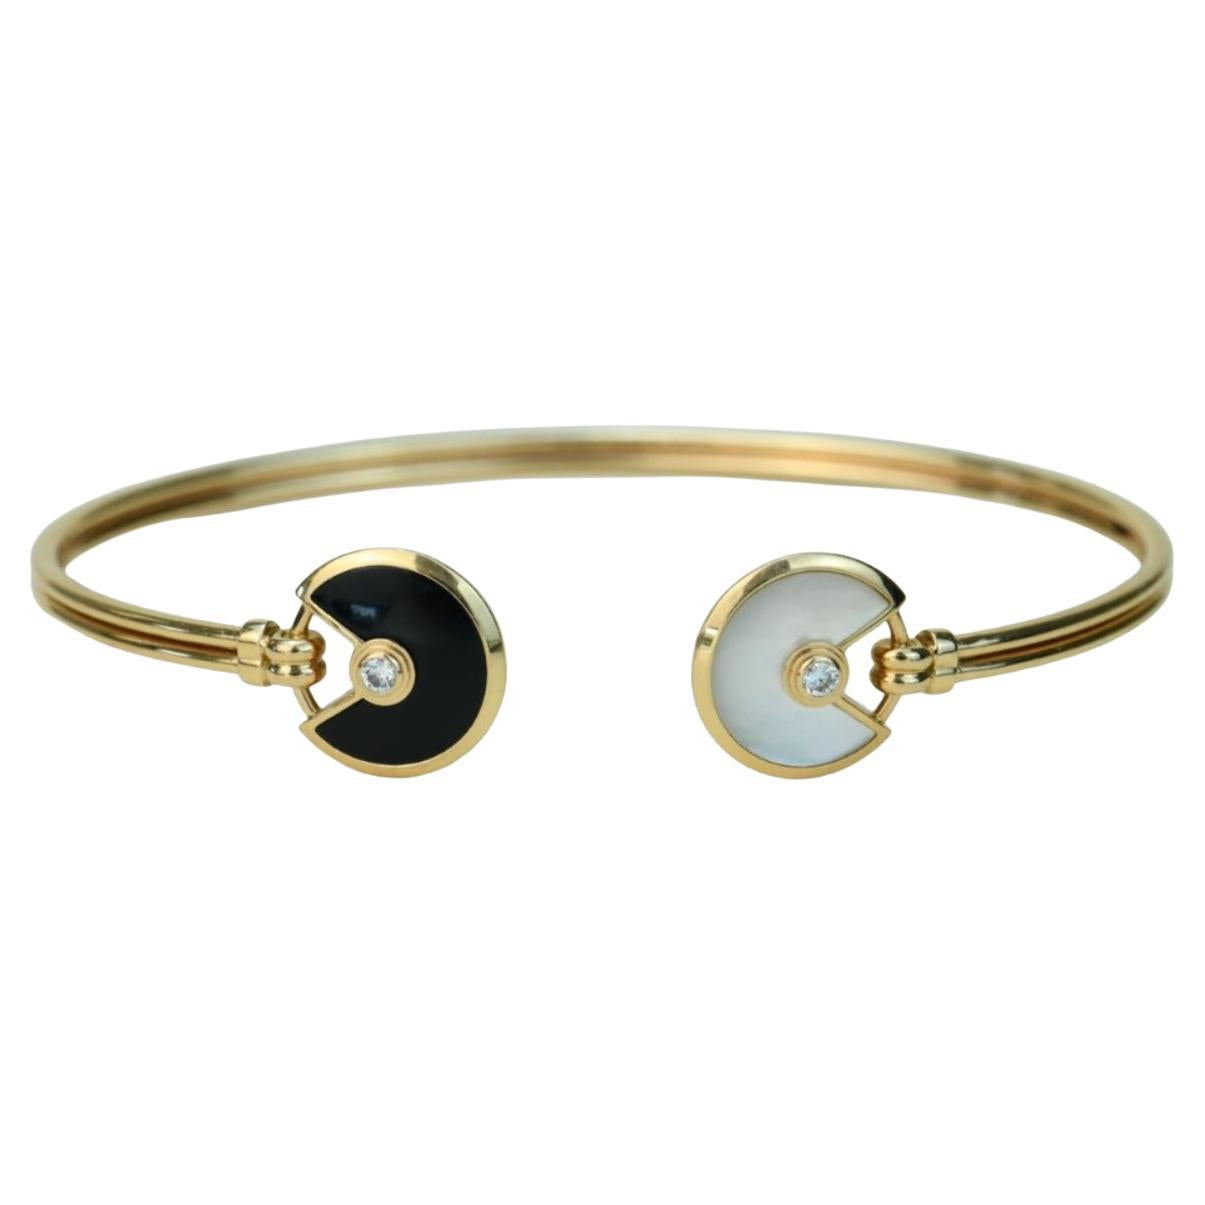 Cartier Amulette Diamond Mother of Pearl and Onyx 18K Yellow Gold Bracelet Size 